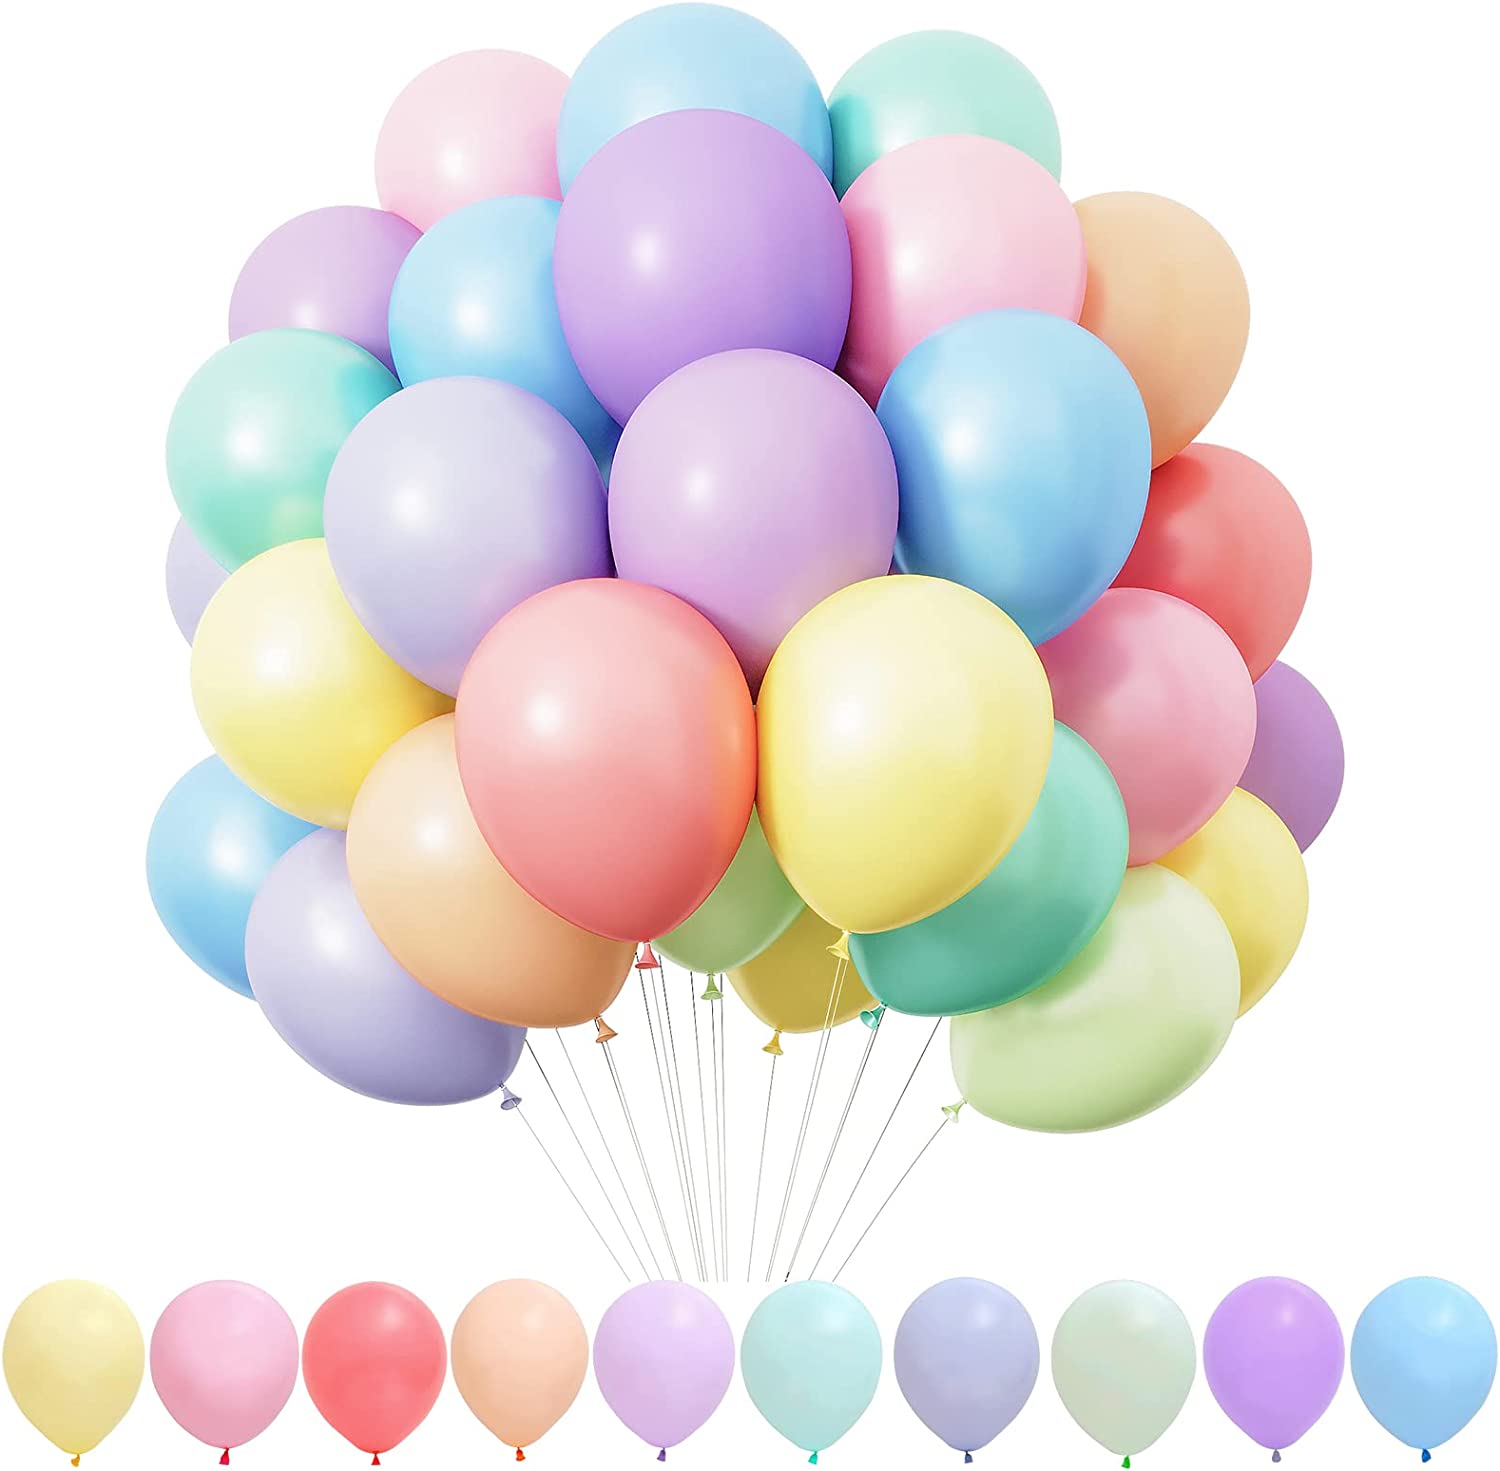 pastel balloons photography